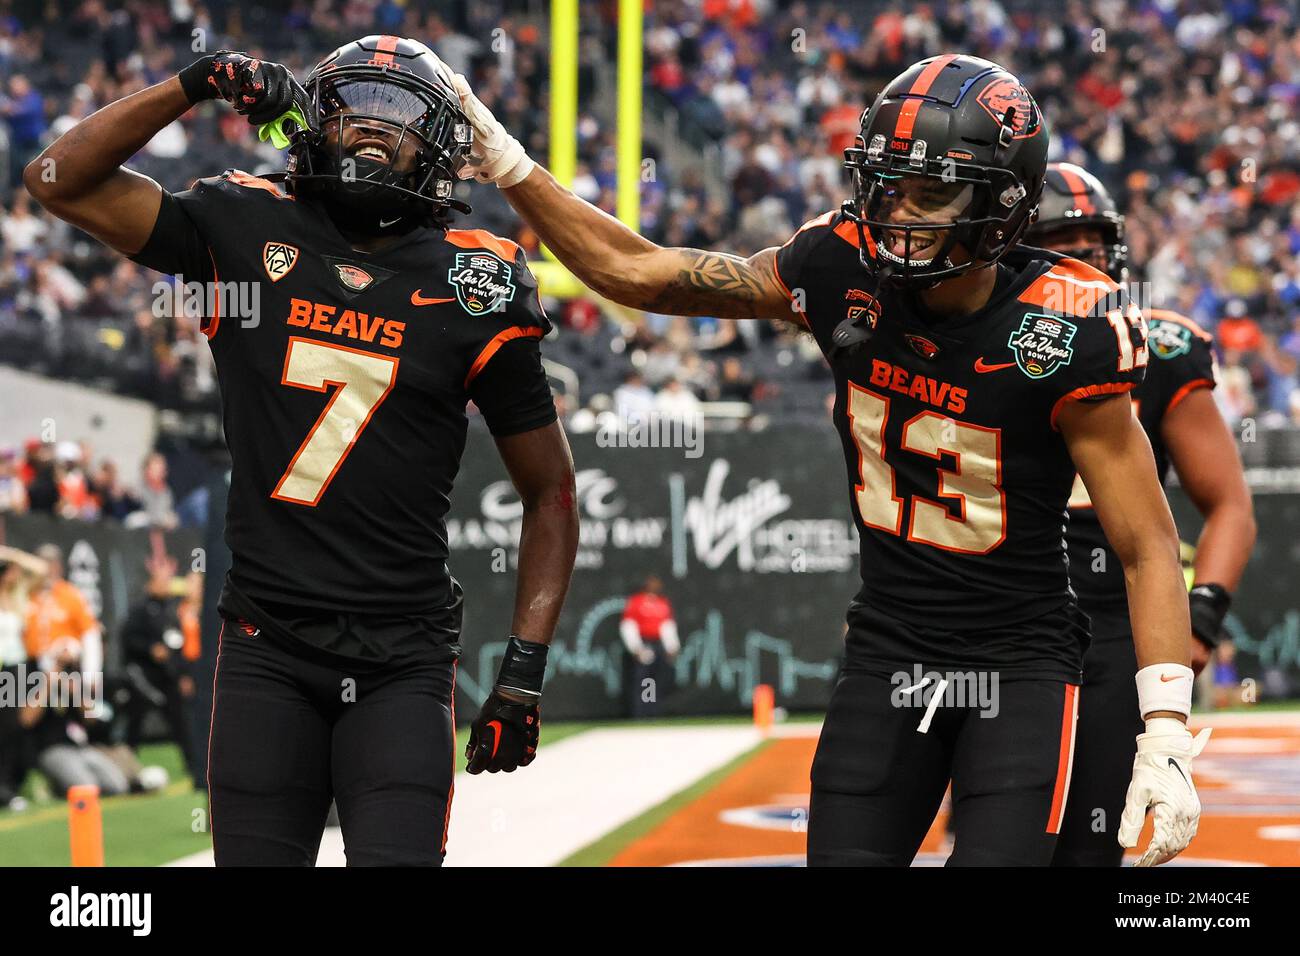 Las Vegas, NV, USA. 17th Dec, 2022. Oregon State Beavers wide receiver Silas Bolden (7) celebrates after scoring a touchdown during the second half of the SRS Distribution Las Vegas Bowl featuring the Florida Gators and the Oregon State Beavers at Allegiant Stadium in Las Vegas, NV. Christopher Trim/CSM/Alamy Live News Stock Photo